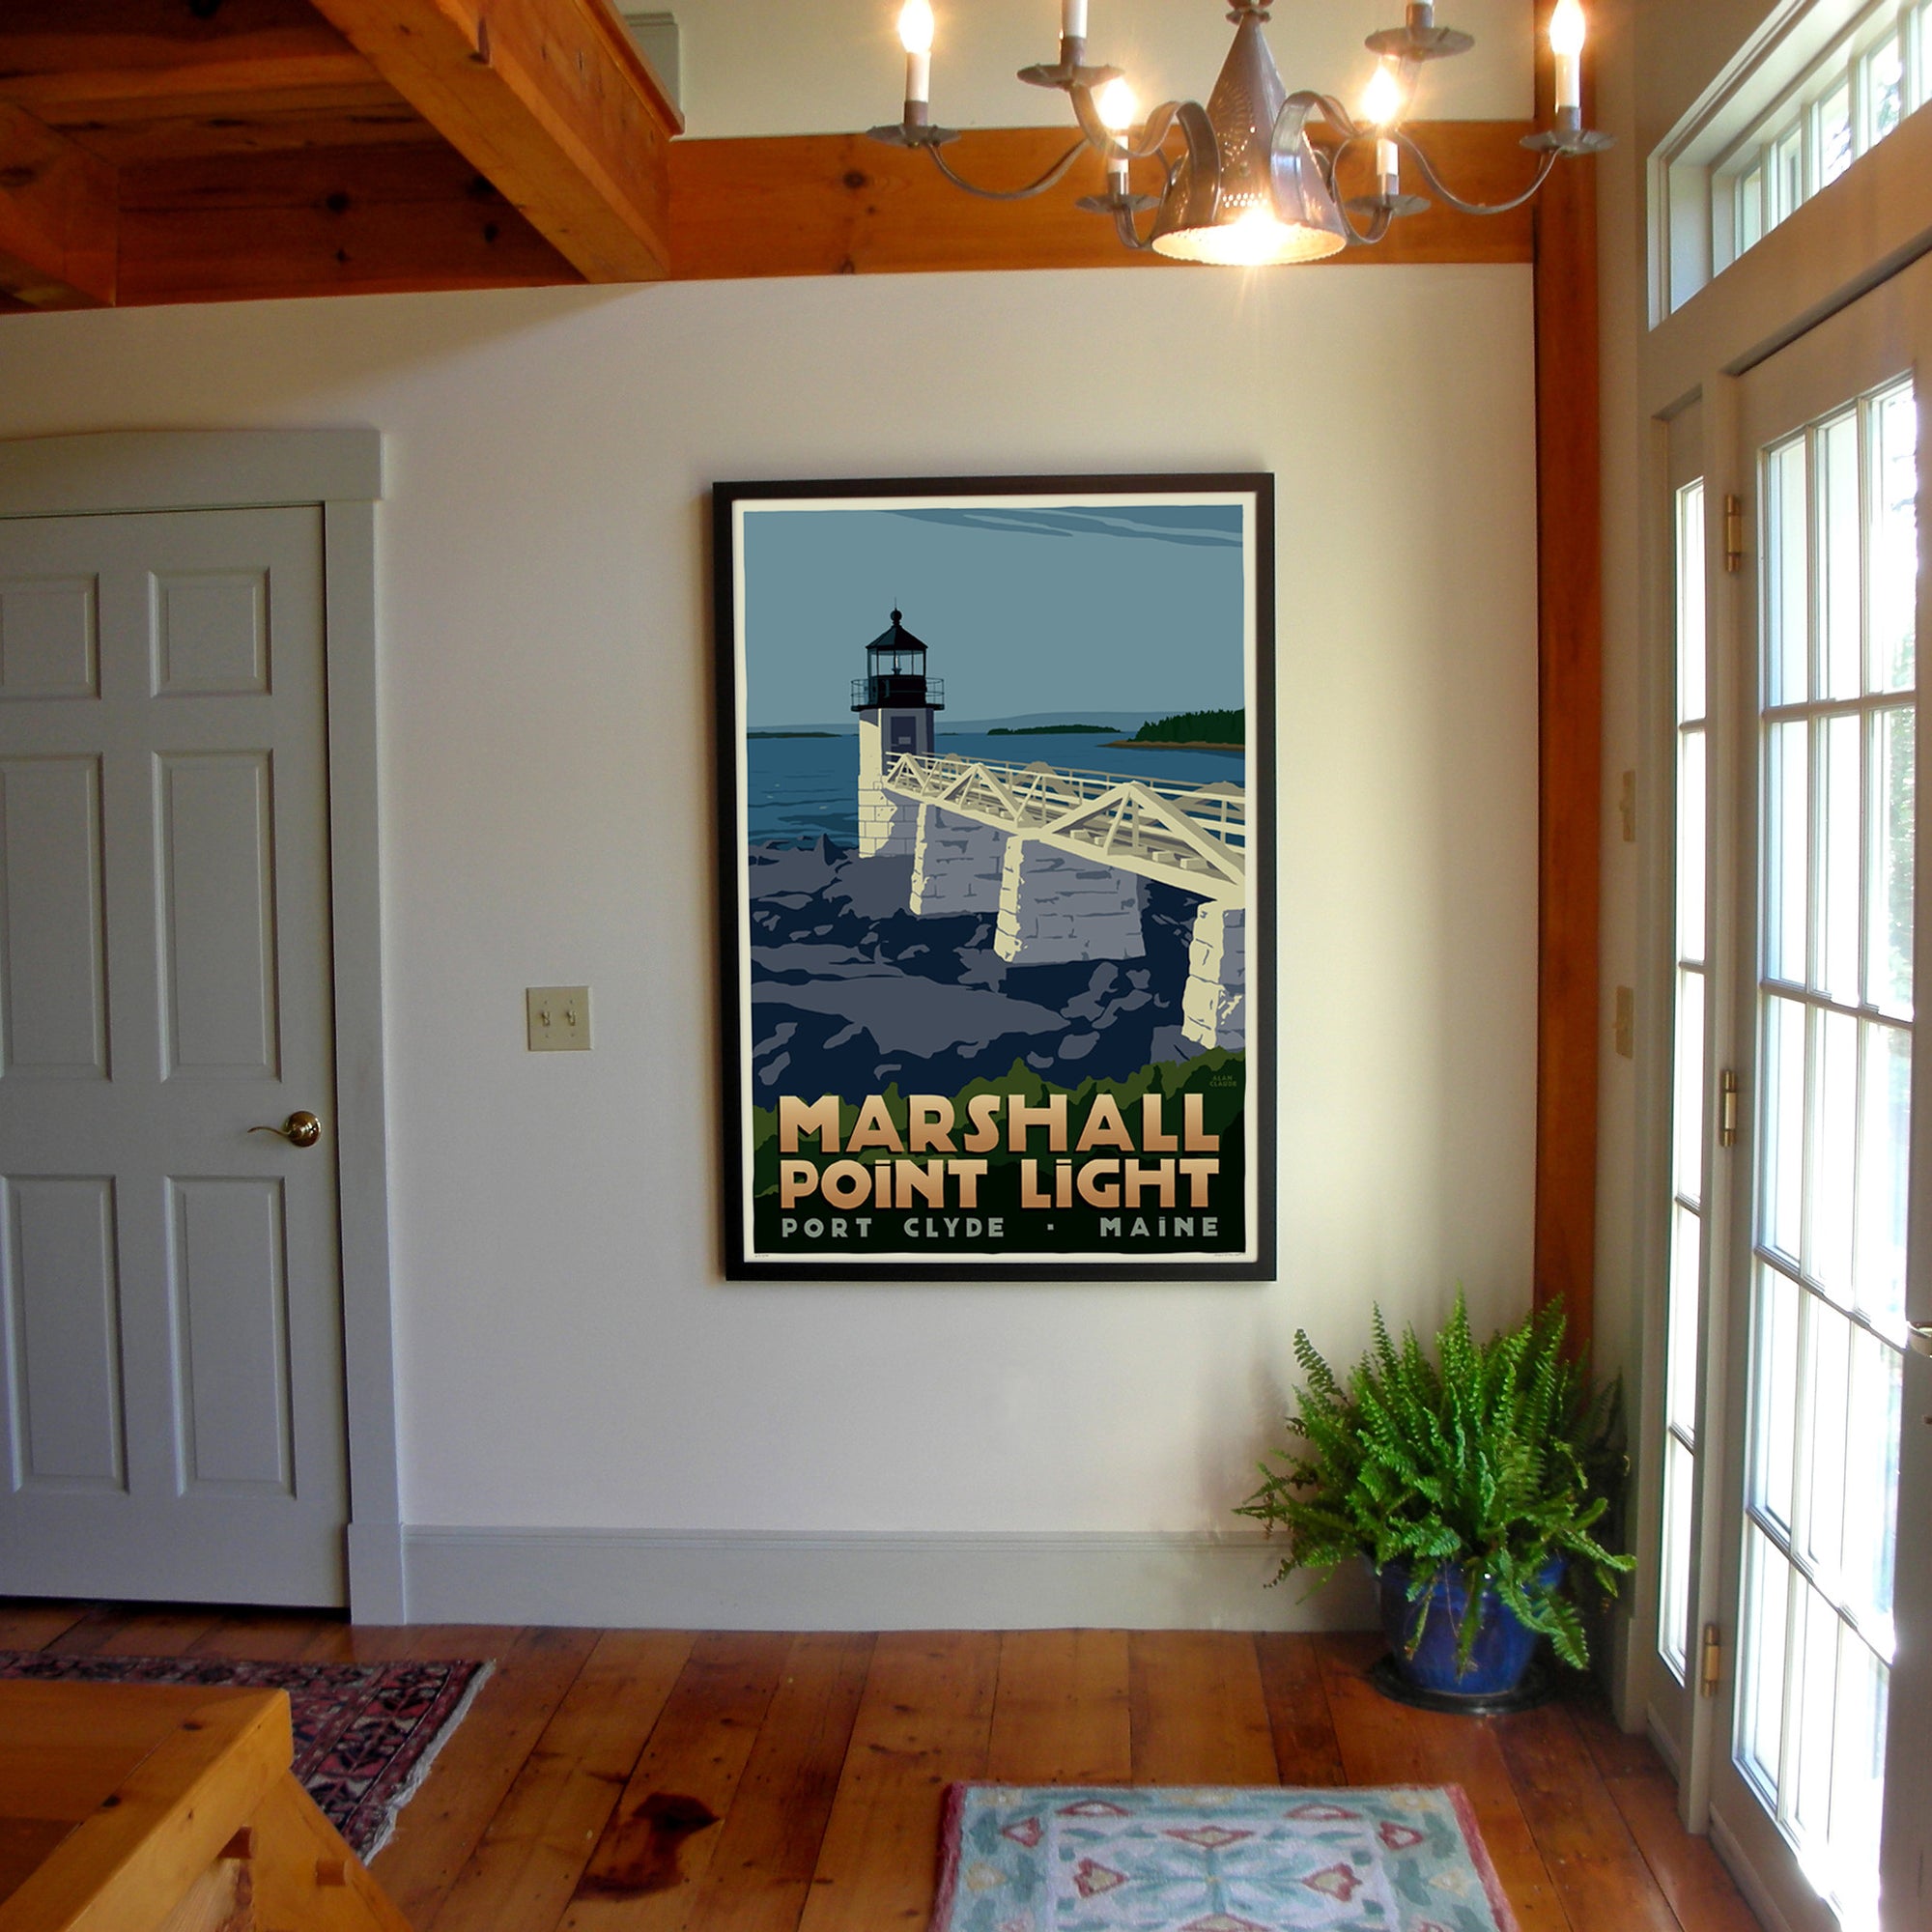 Marshall Point Light Art Print 36" x 53" Framed Travel Poster By Alan Claude - Maine